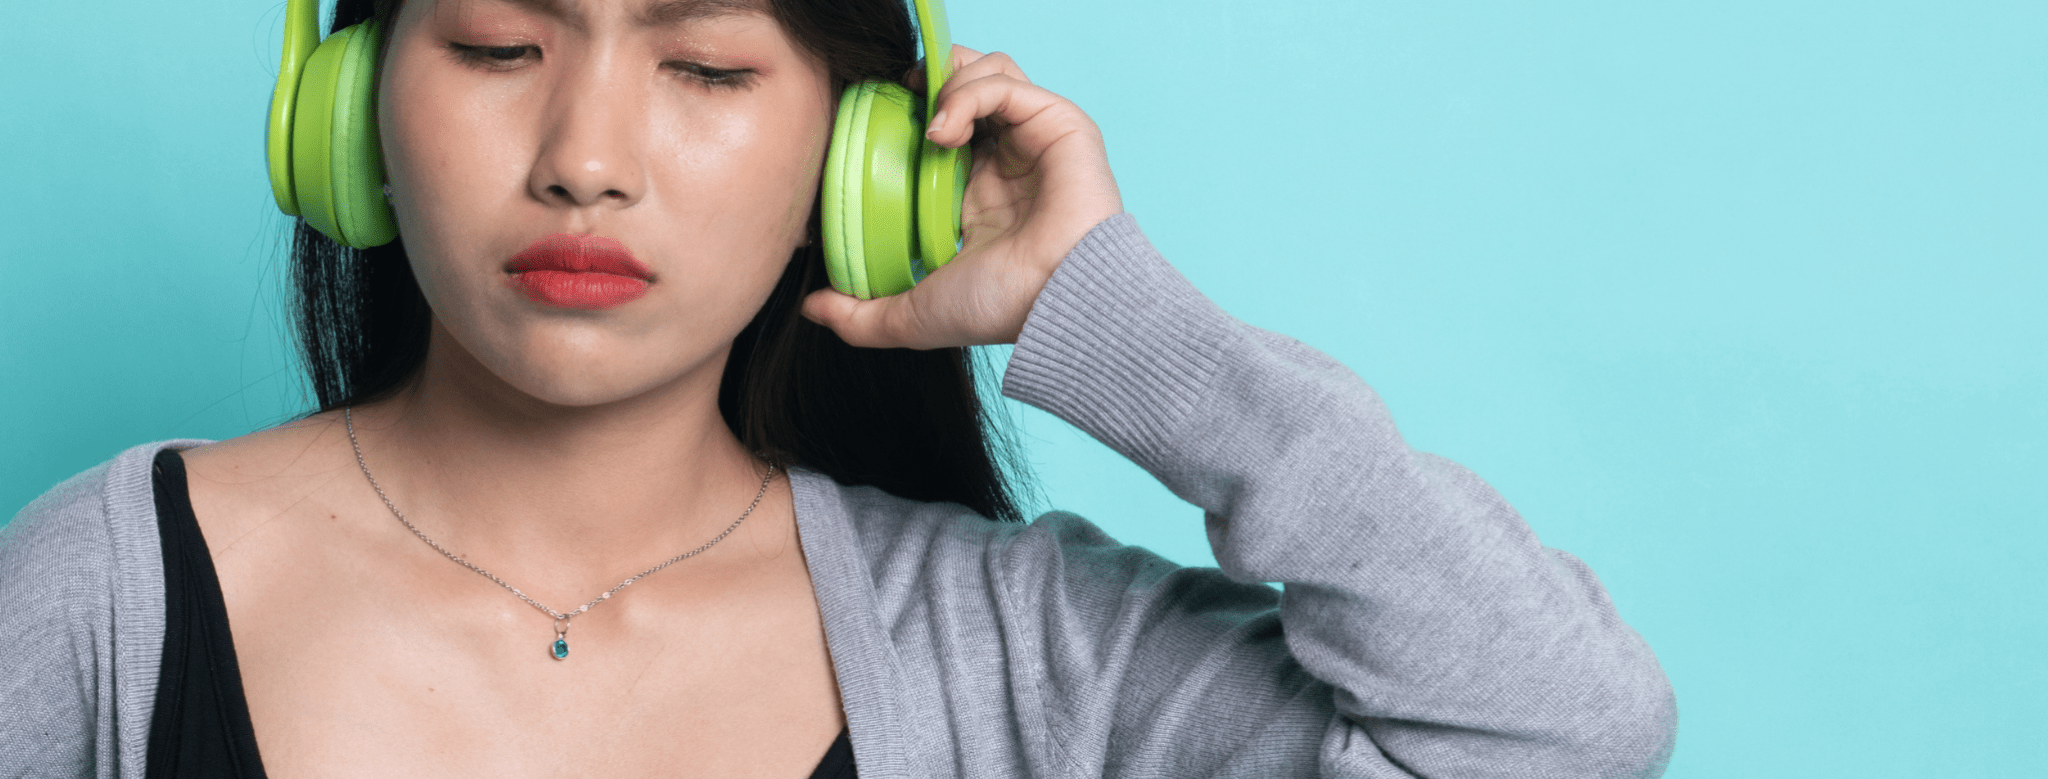 asian woman with green headphones on with a distressed look woman